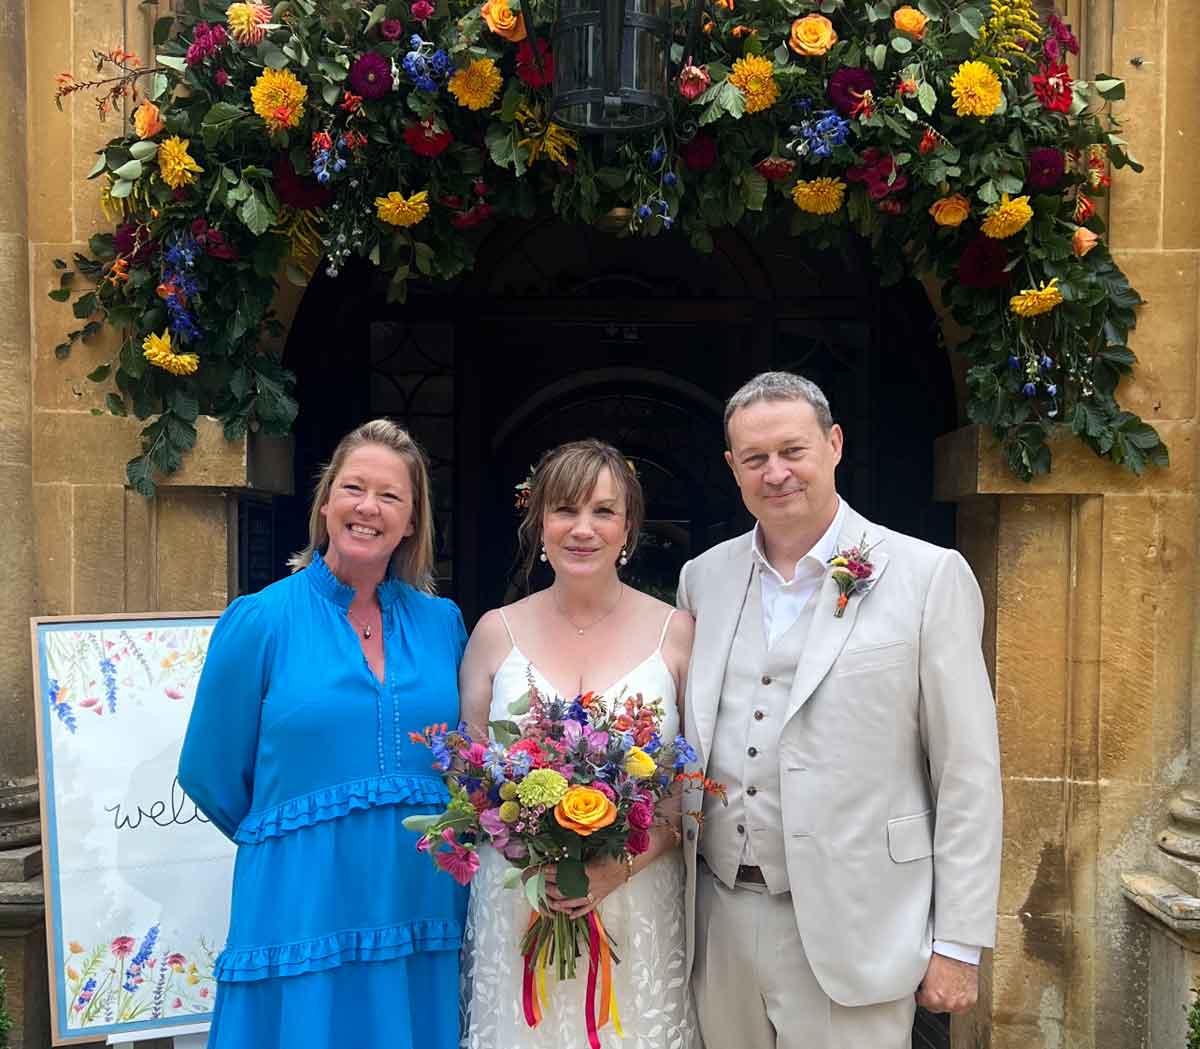 A couple renewing vows with Tara the Celebrant